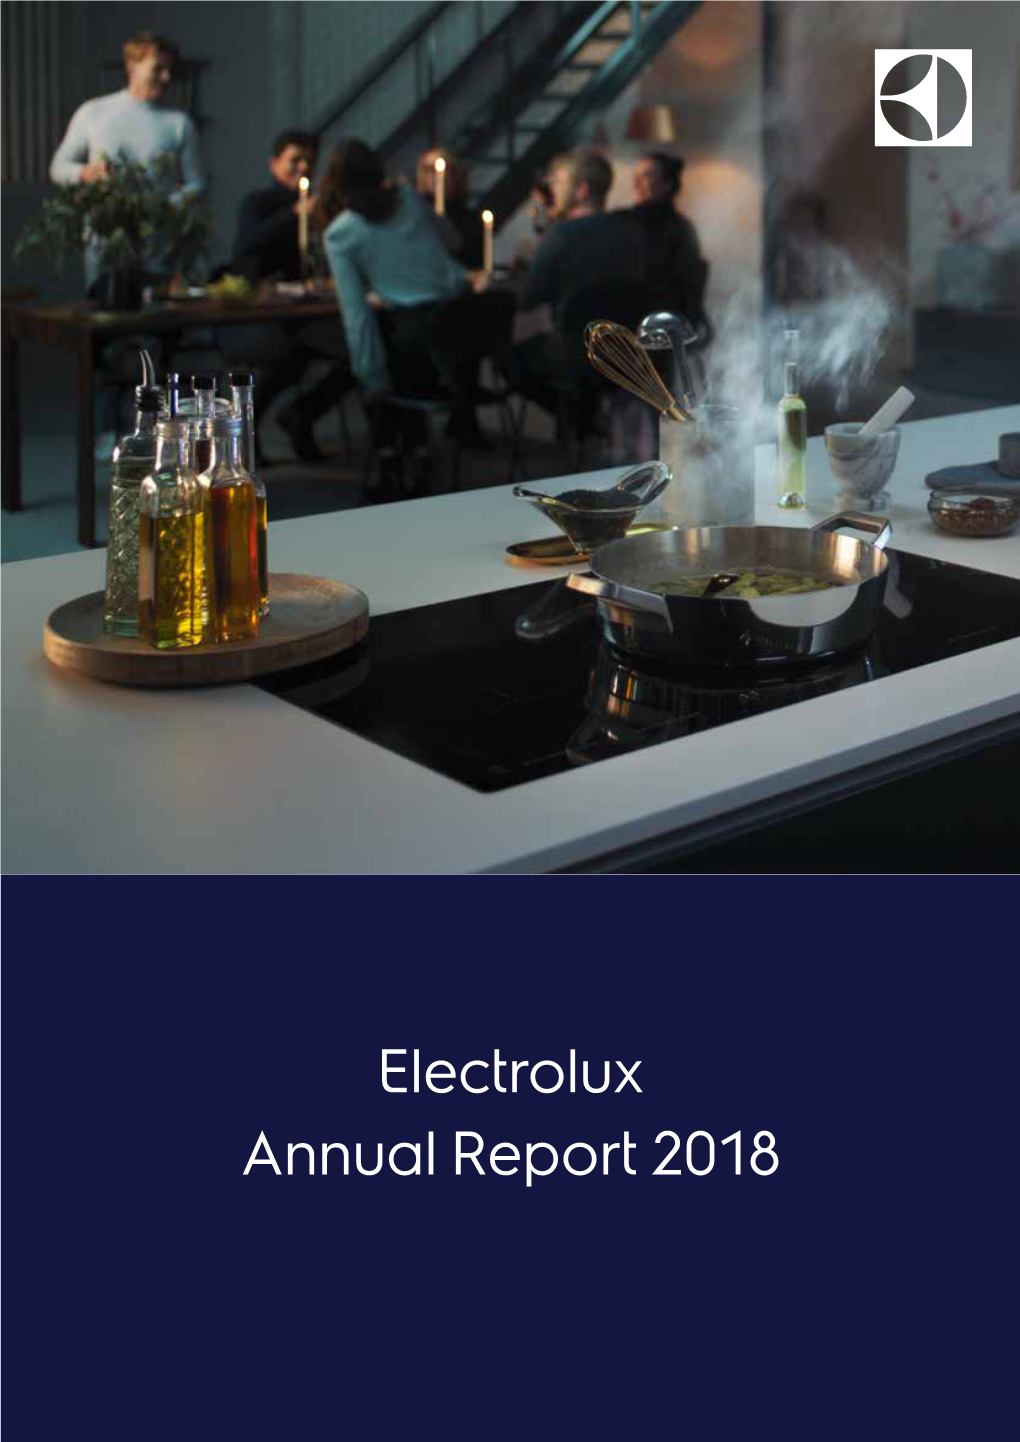 Electrolux Annual Report 2018 Worldreginfo - Fccde4d7-Eec7-4E2c-B0d3-C97fc88d3132 Well Positioned to Create Value